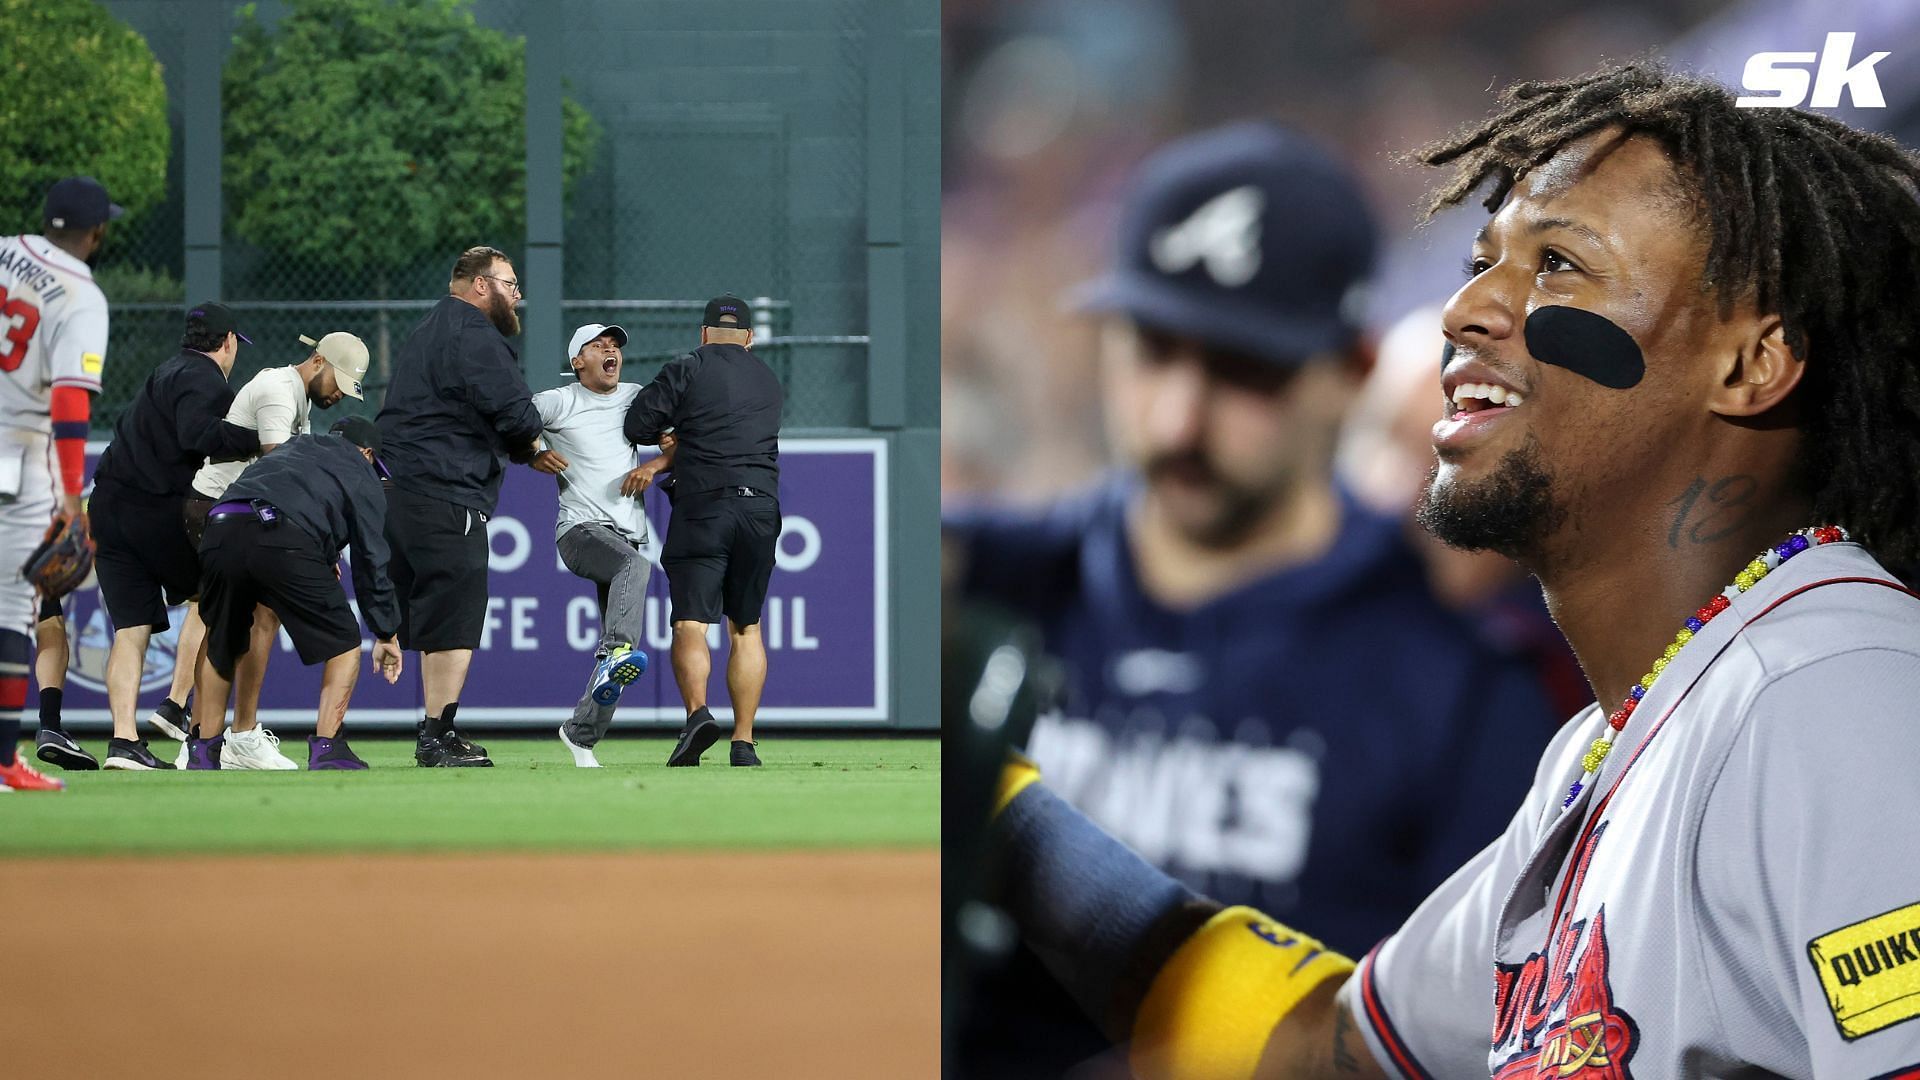 Braves star Ronald Acuna Jr. was knocked to the ground on Monday night